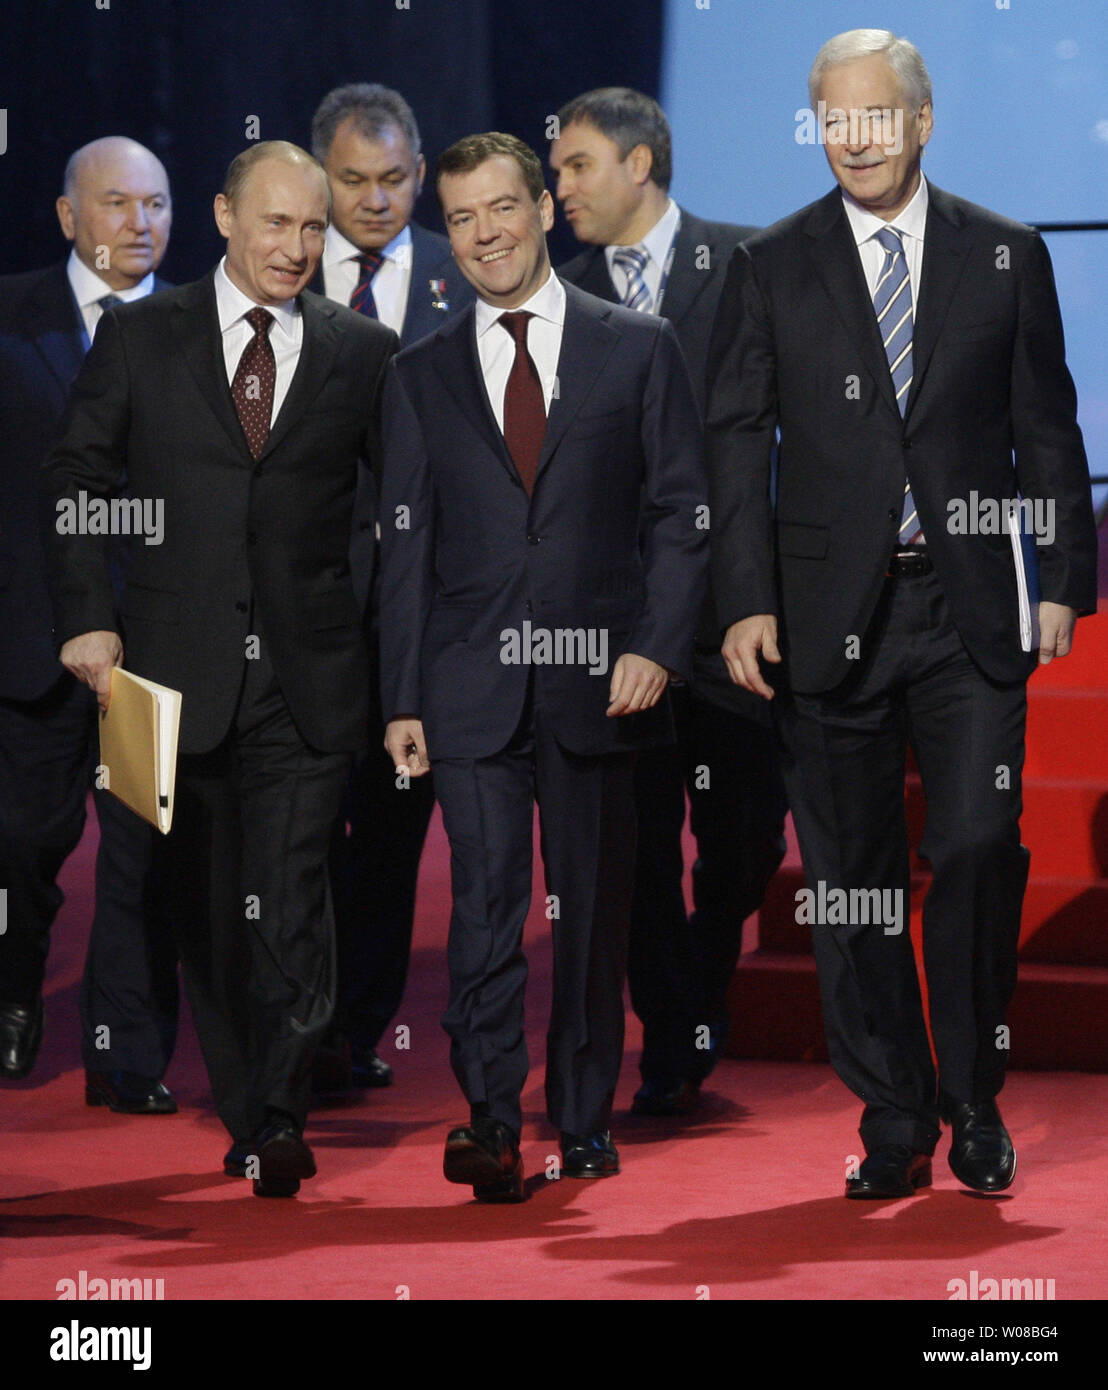 (L-R) Russian Prime Minister Vladimir Putin, President Dmitry Medvedev and Parliament Speaker and Chairman of the United Russia party council Boris Gryzlov arrive at the United Russia party's congress in St. Petersburg on November 21, 2009. UPI/Anatoli Zhdanov Stock Photo